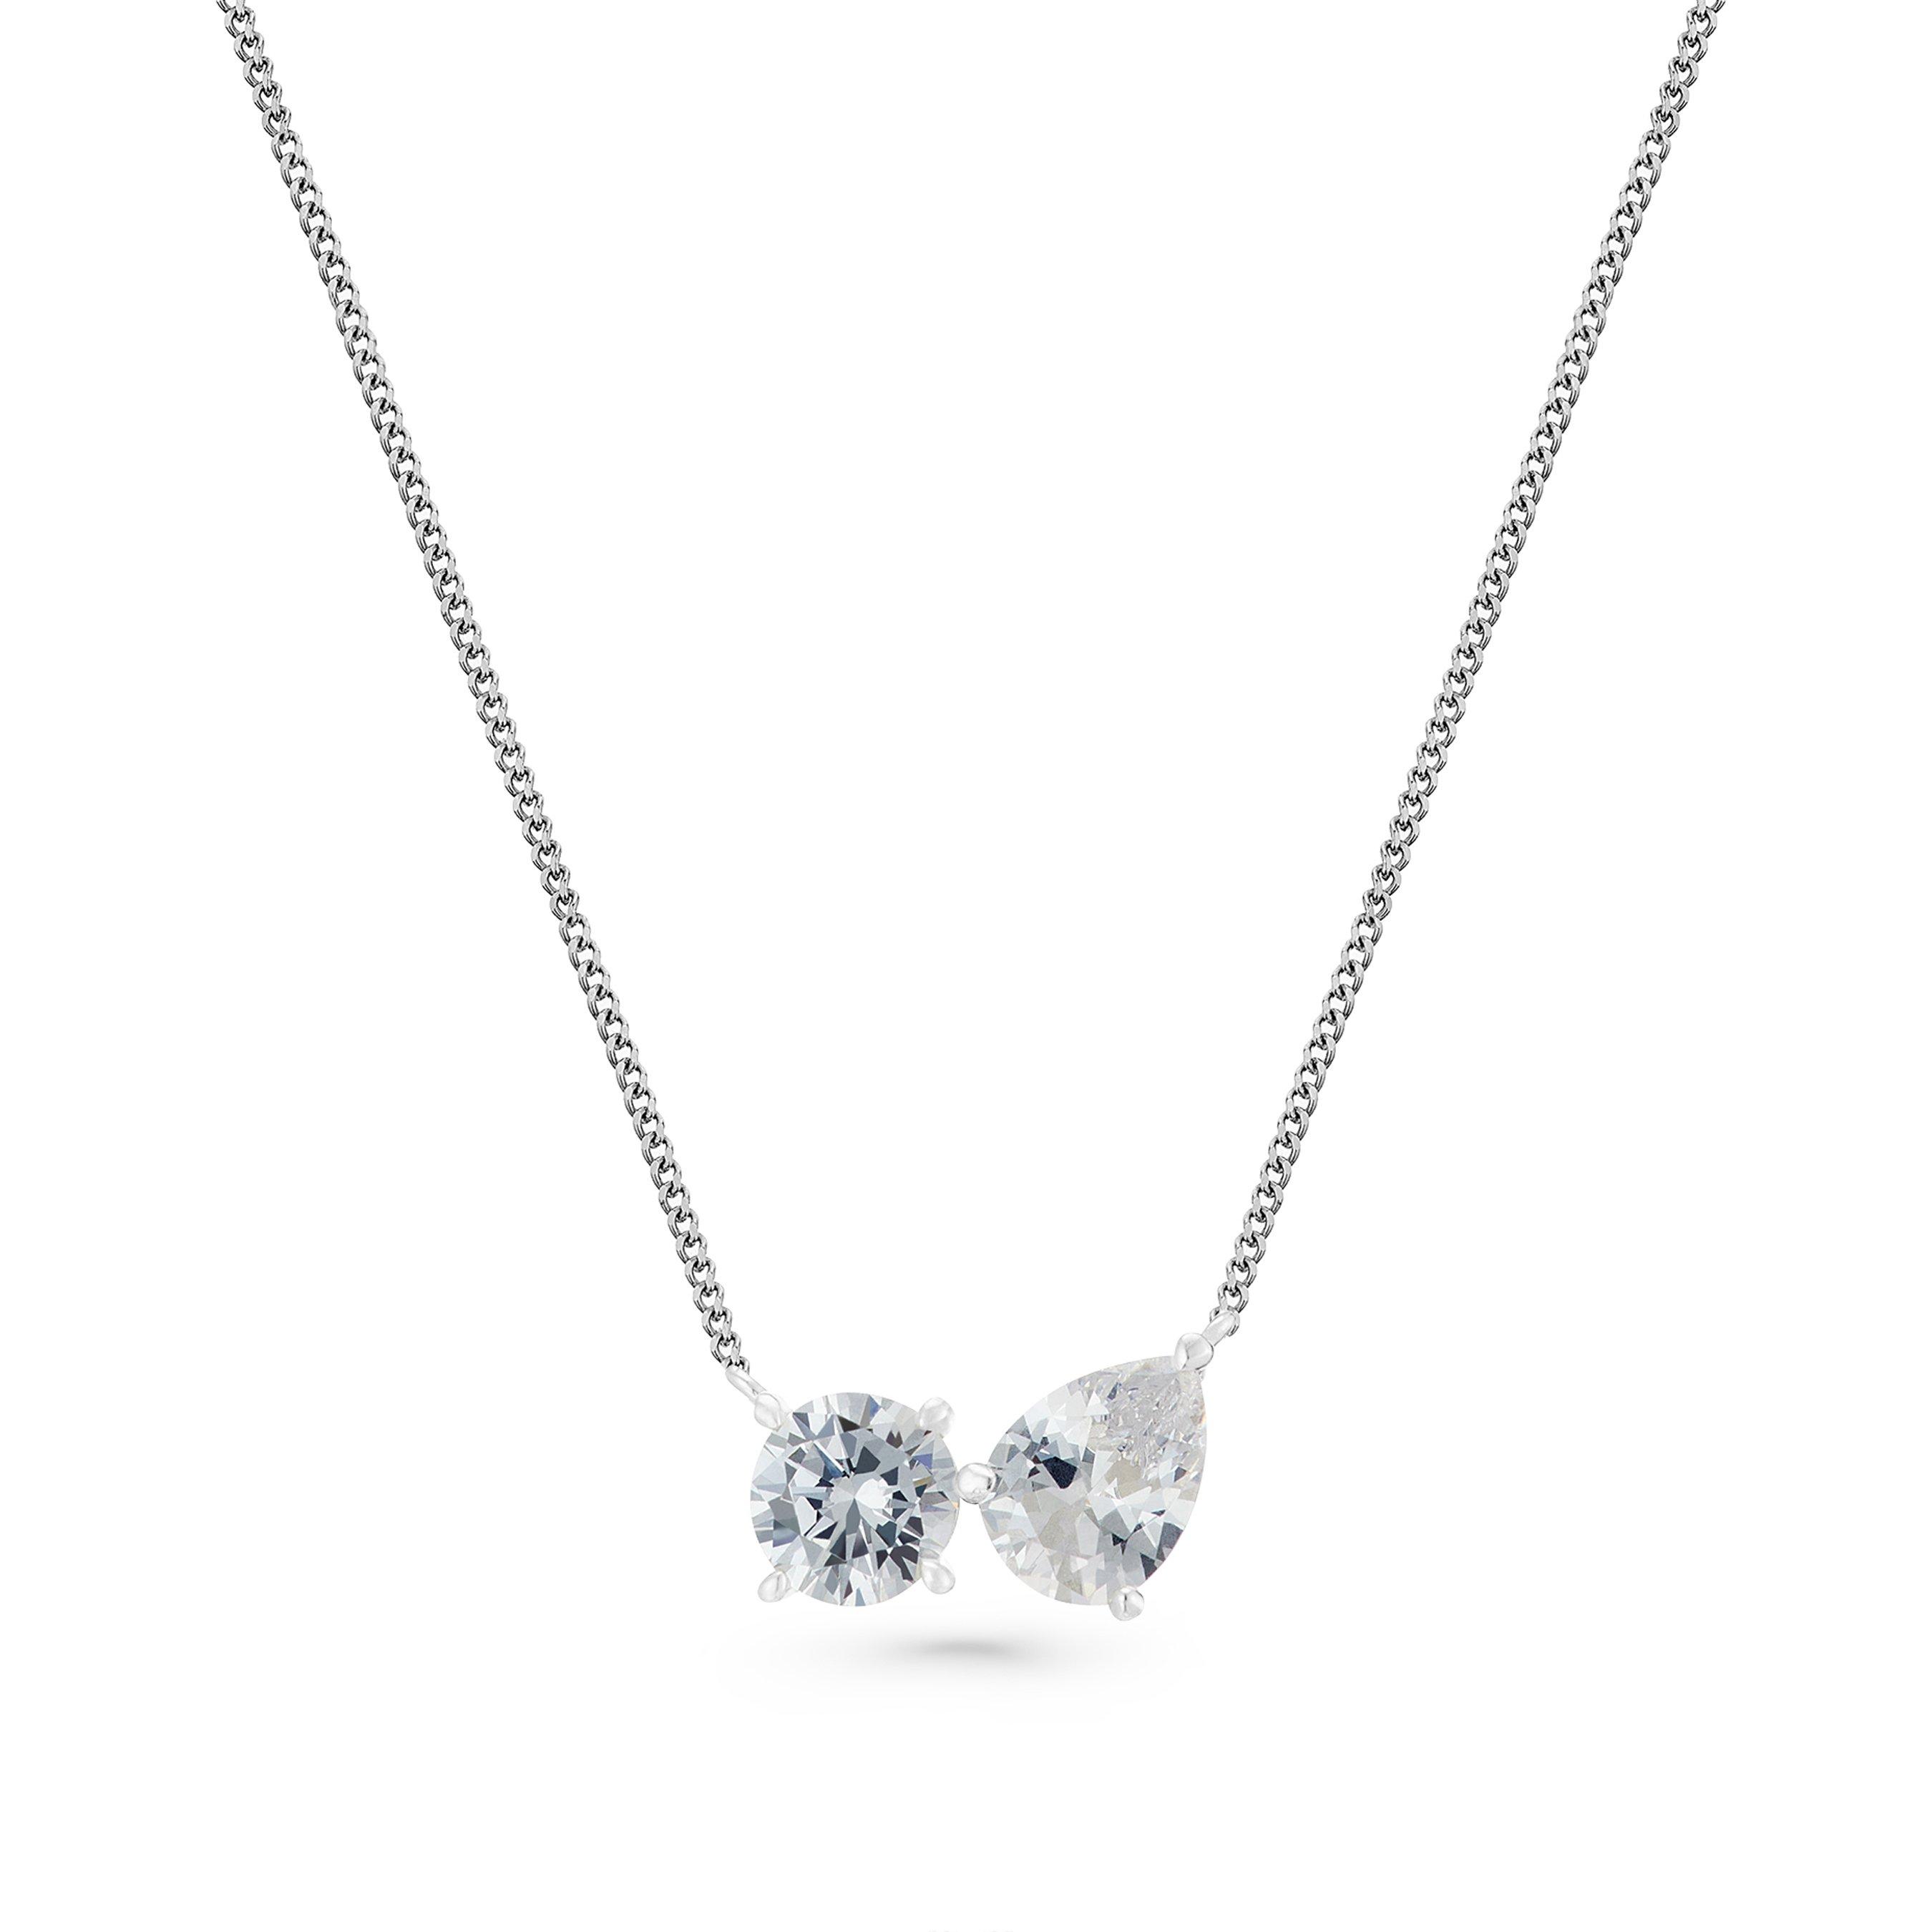 Silver Cubic Zirconia Necklace | 0139372 | Beaverbrooks the Jewellers